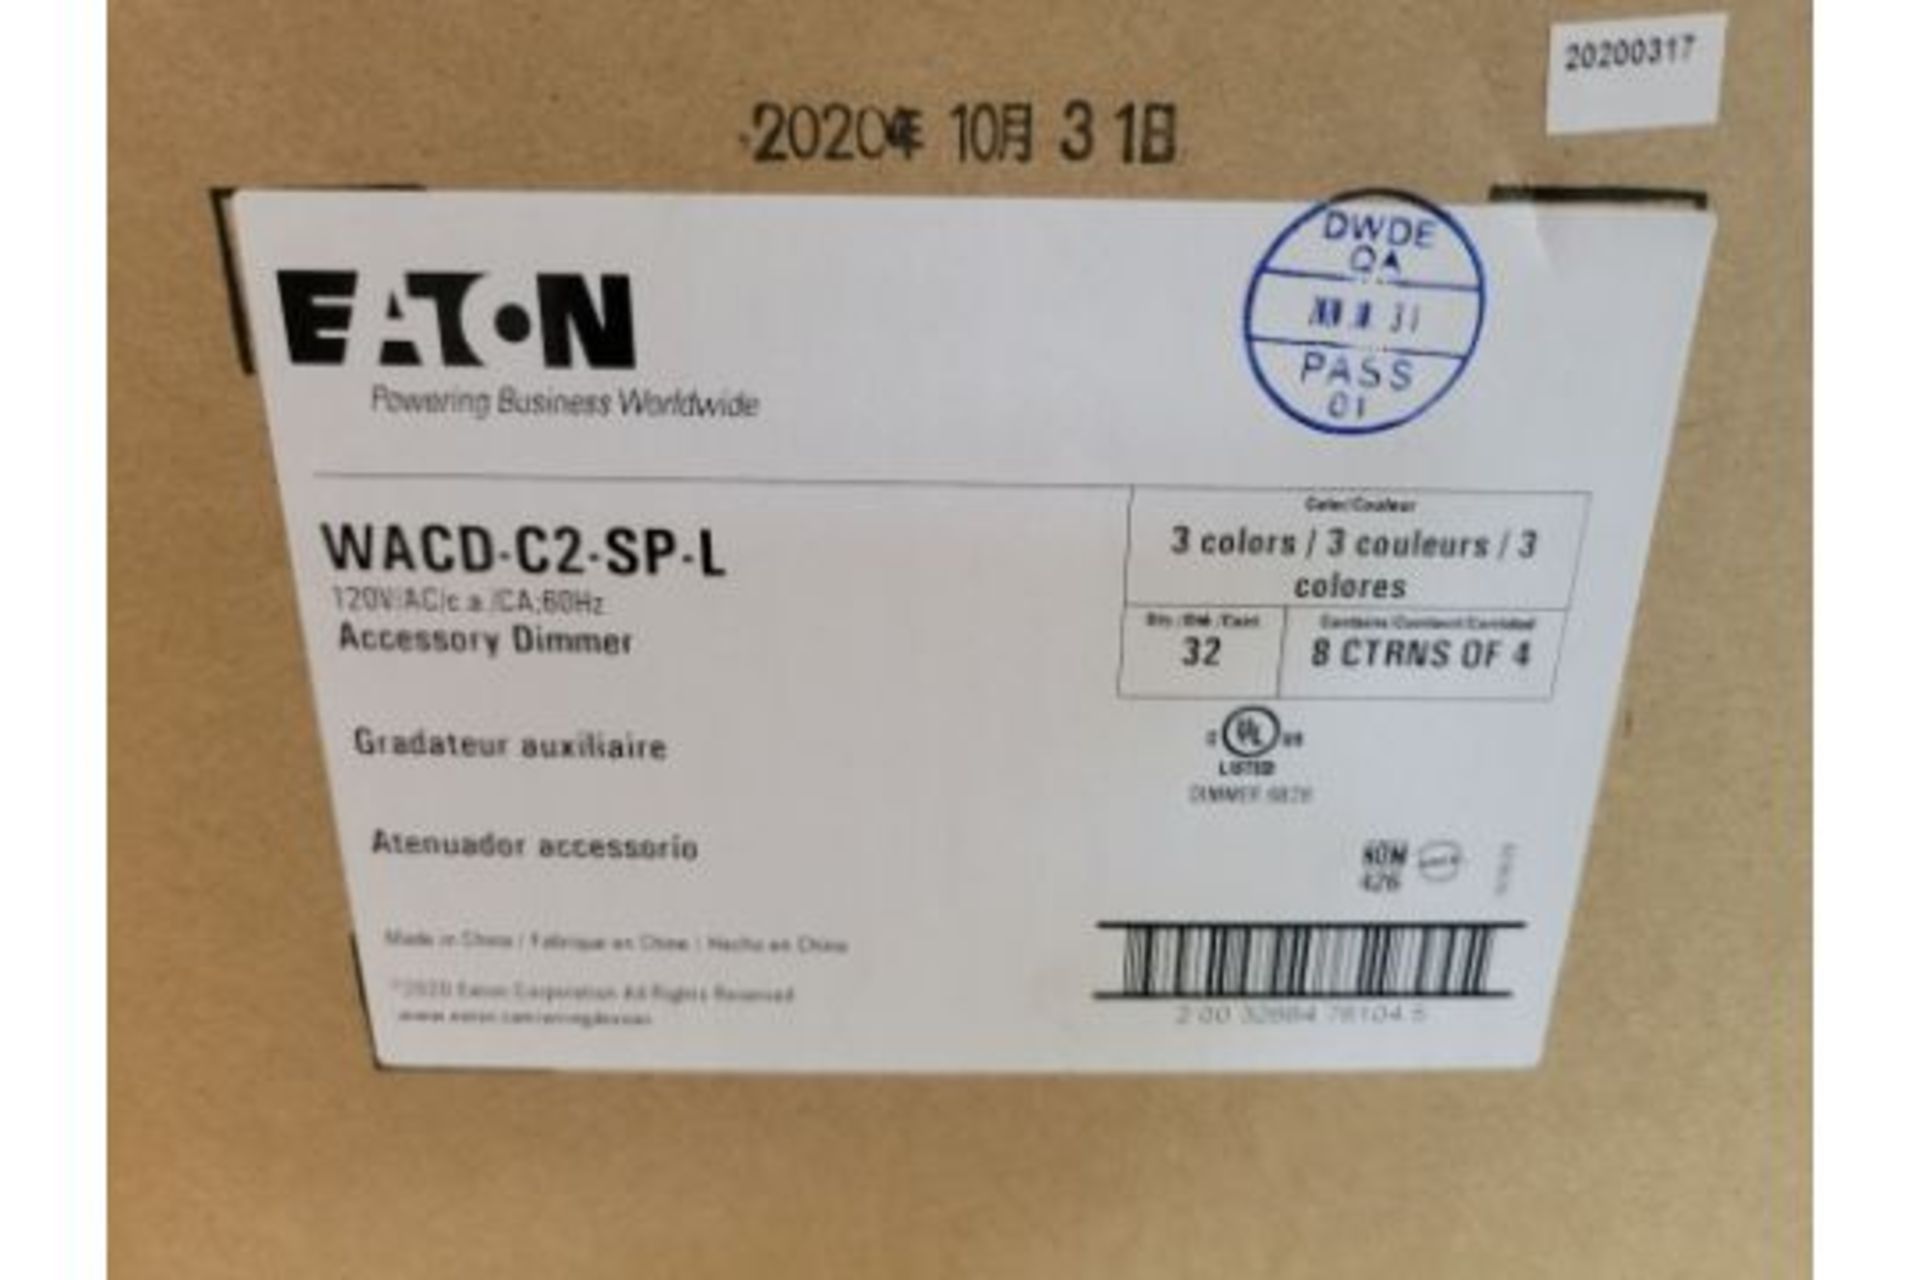 32x Eaton WACD-C2-SP-L Light and Dimmer Switches WiFi Smart Dimmer 120V 3 way